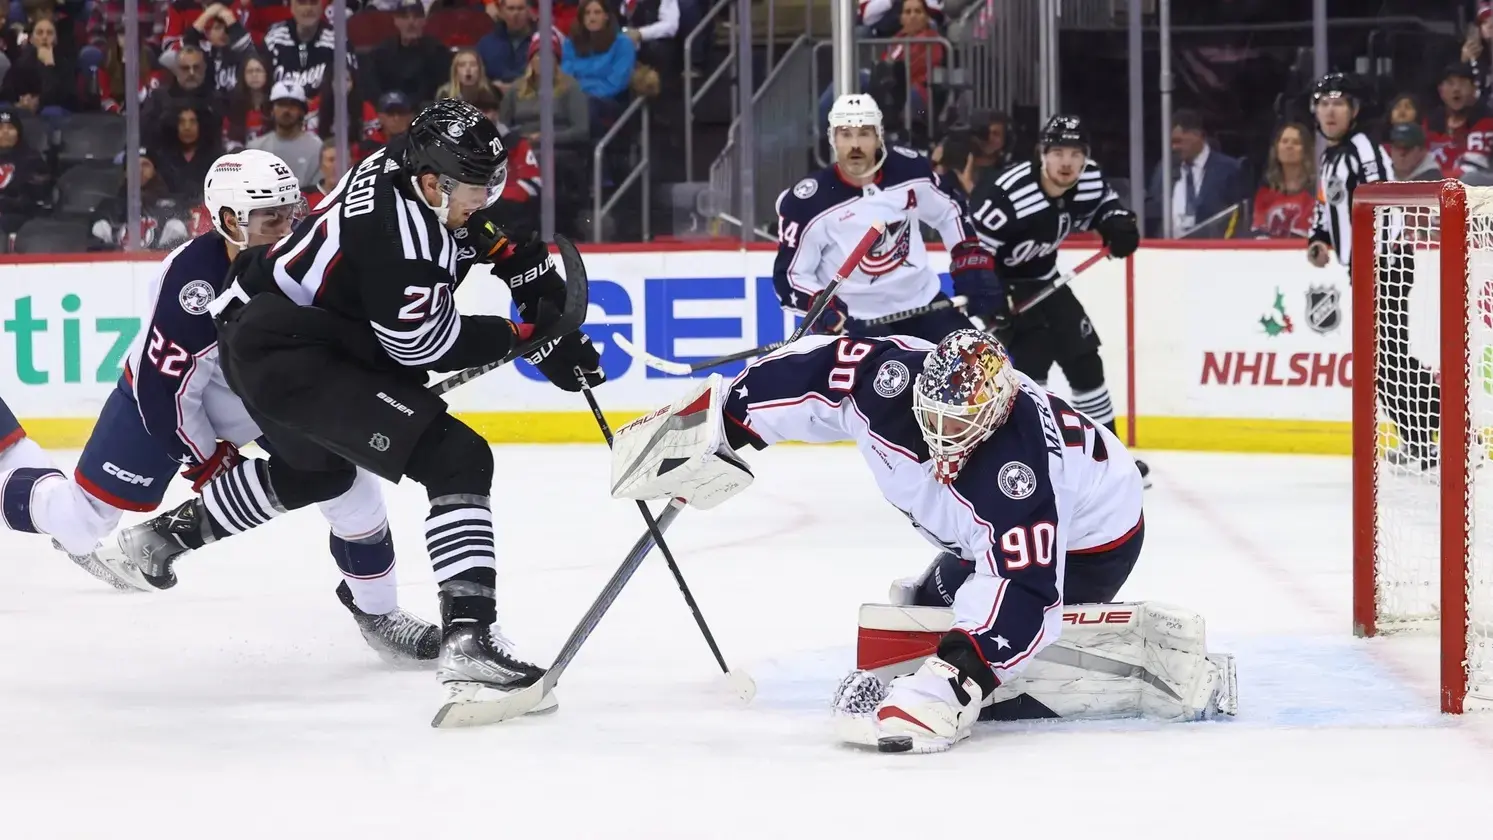 Columbus Blue Jackets goaltender Elvis Merzlikins (90) makes a save while New Jersey Devils center Michael McLeod (20) looks for the rebound during the second period at Prudential Center. / Ed Mulholland-USA TODAY Sports